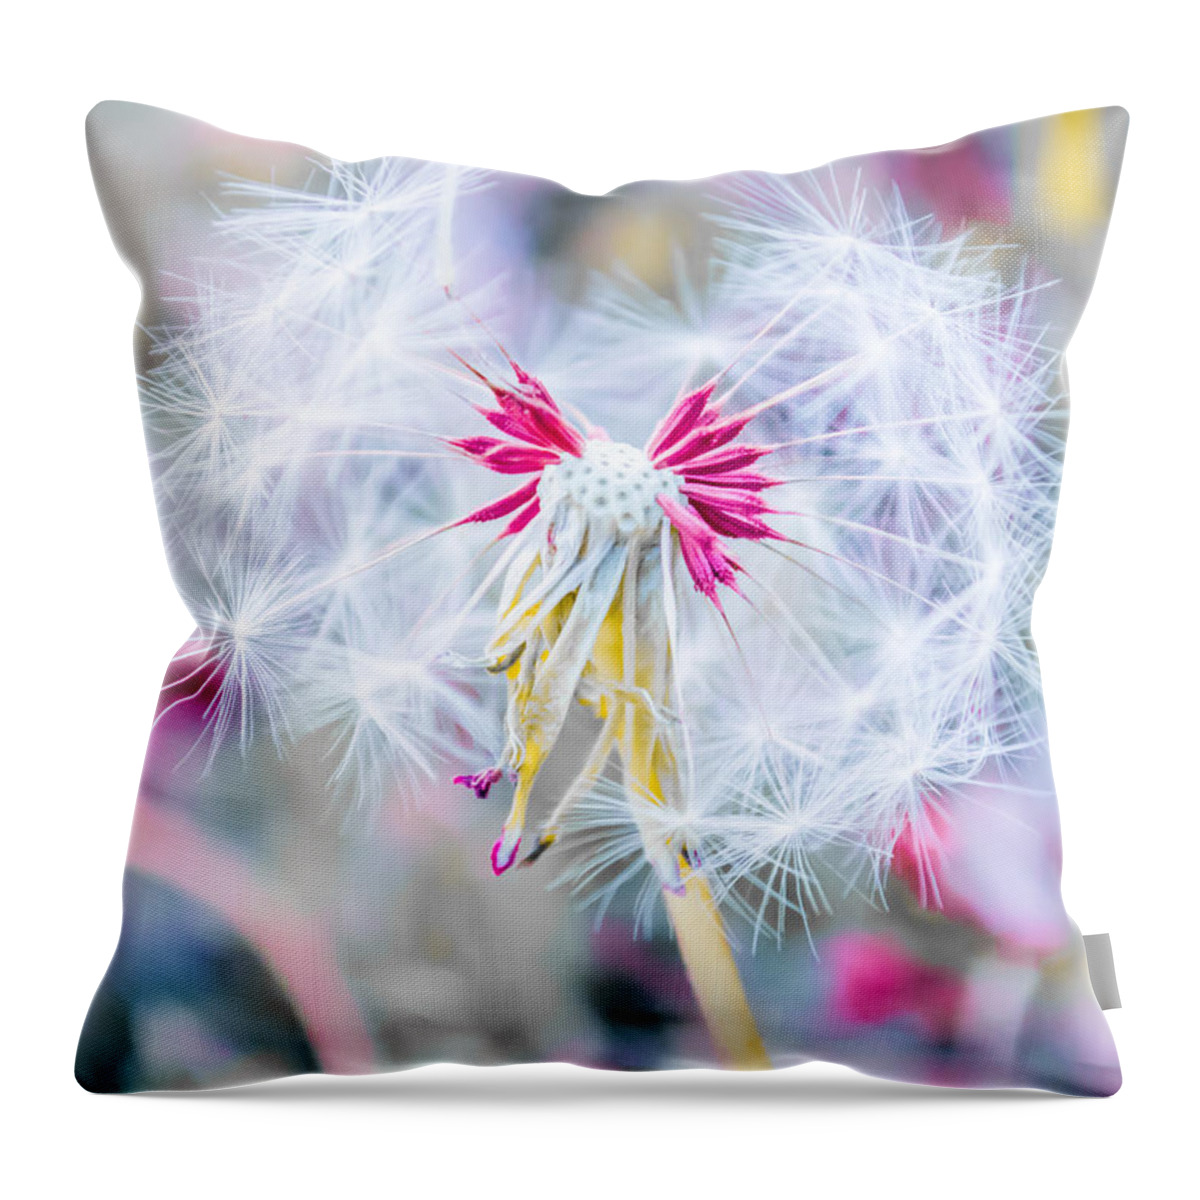 Pink Throw Pillow featuring the photograph Pink Dandelion by Parker Cunningham